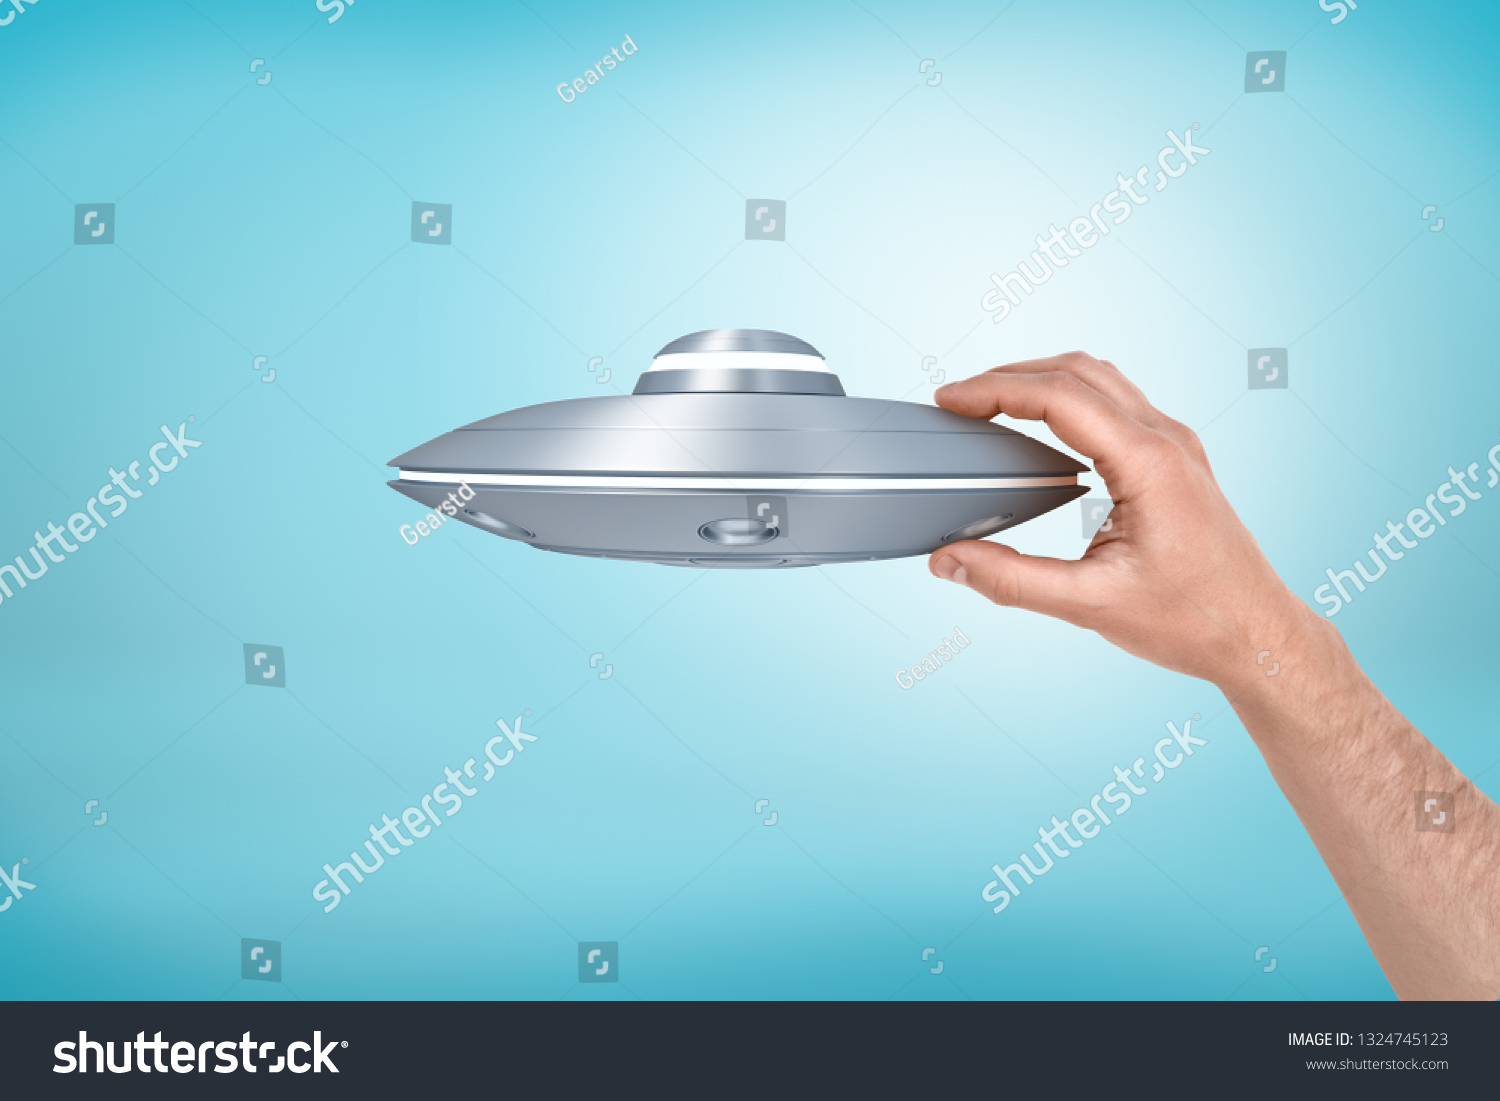 Close-up of man's hand holding small light-gray UFO on light-blue background. Ufology club. Close encounter. I want to believe. #1324745123